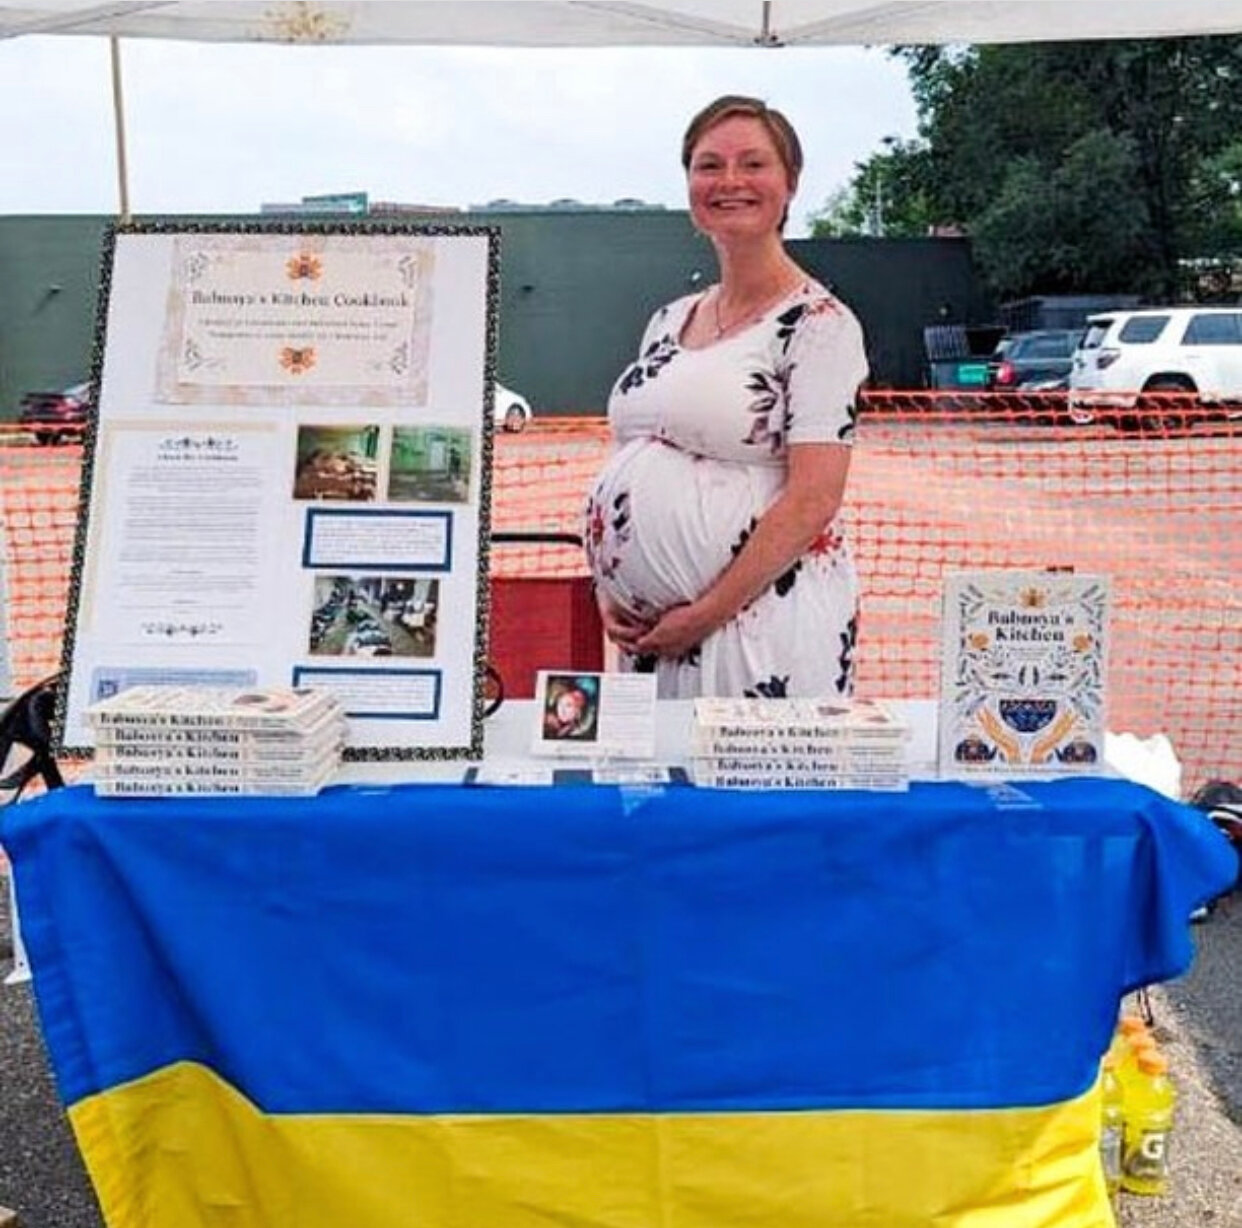 Sarah Friedman sells Babusya’s Kitchen cookbooks to raise funds for Ukraine relief efforts at the Oxendale's vendor fair.